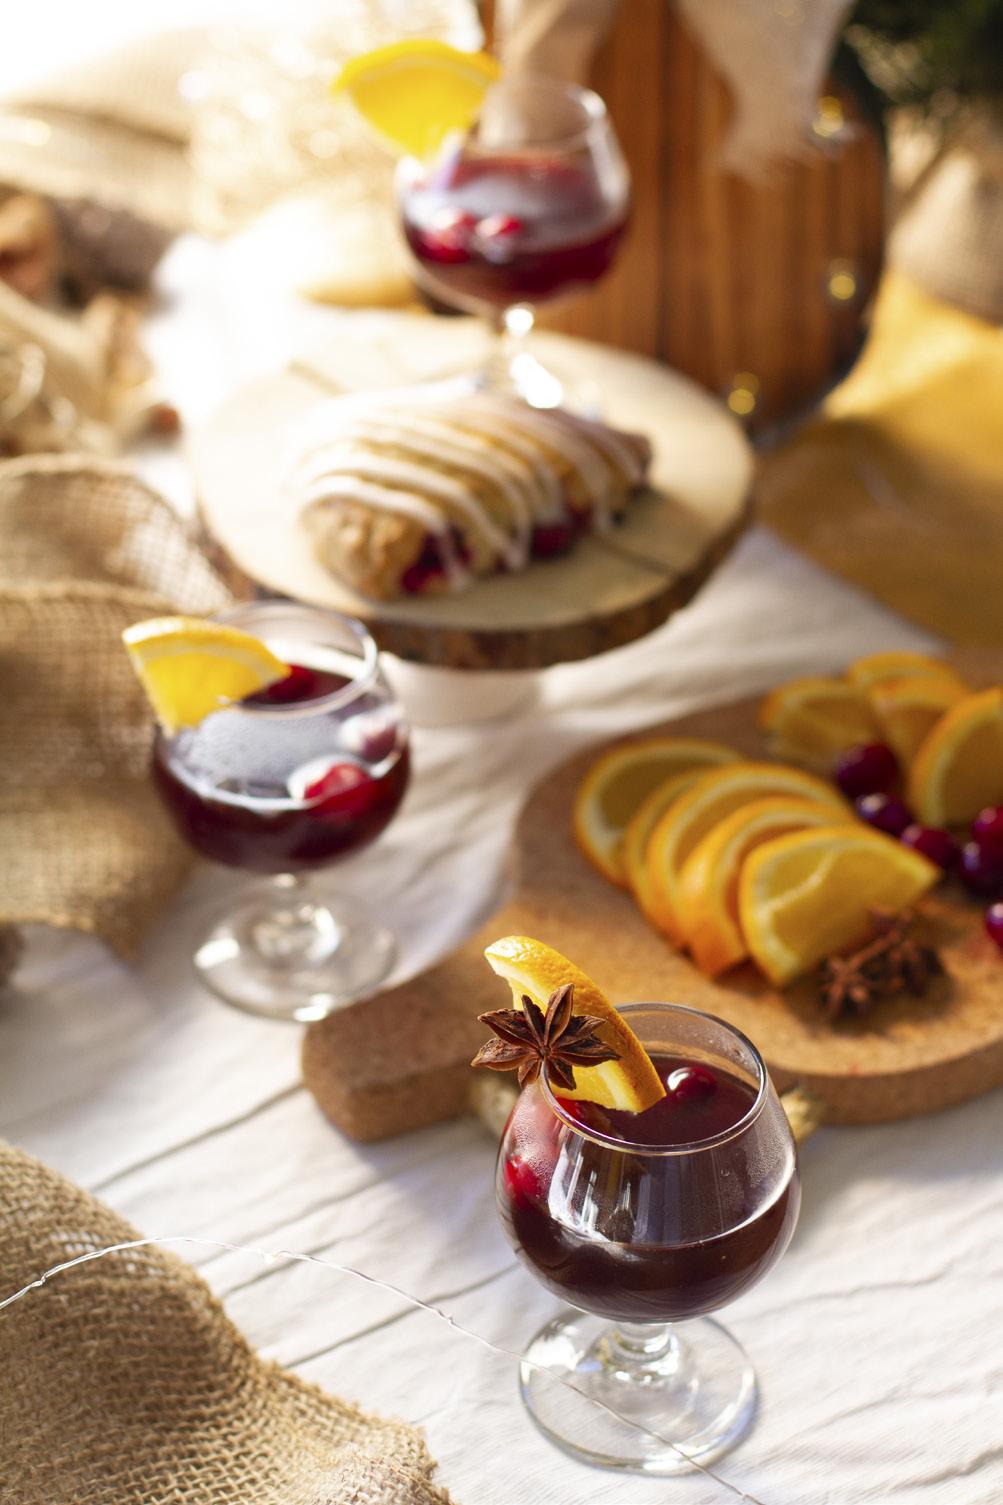 Merrily Mulled Wine This is the ideal gather-around-the-table holiday refreshment for your next party. The smell alone of this mixture melding in your slow cooker will put you in the spirit.